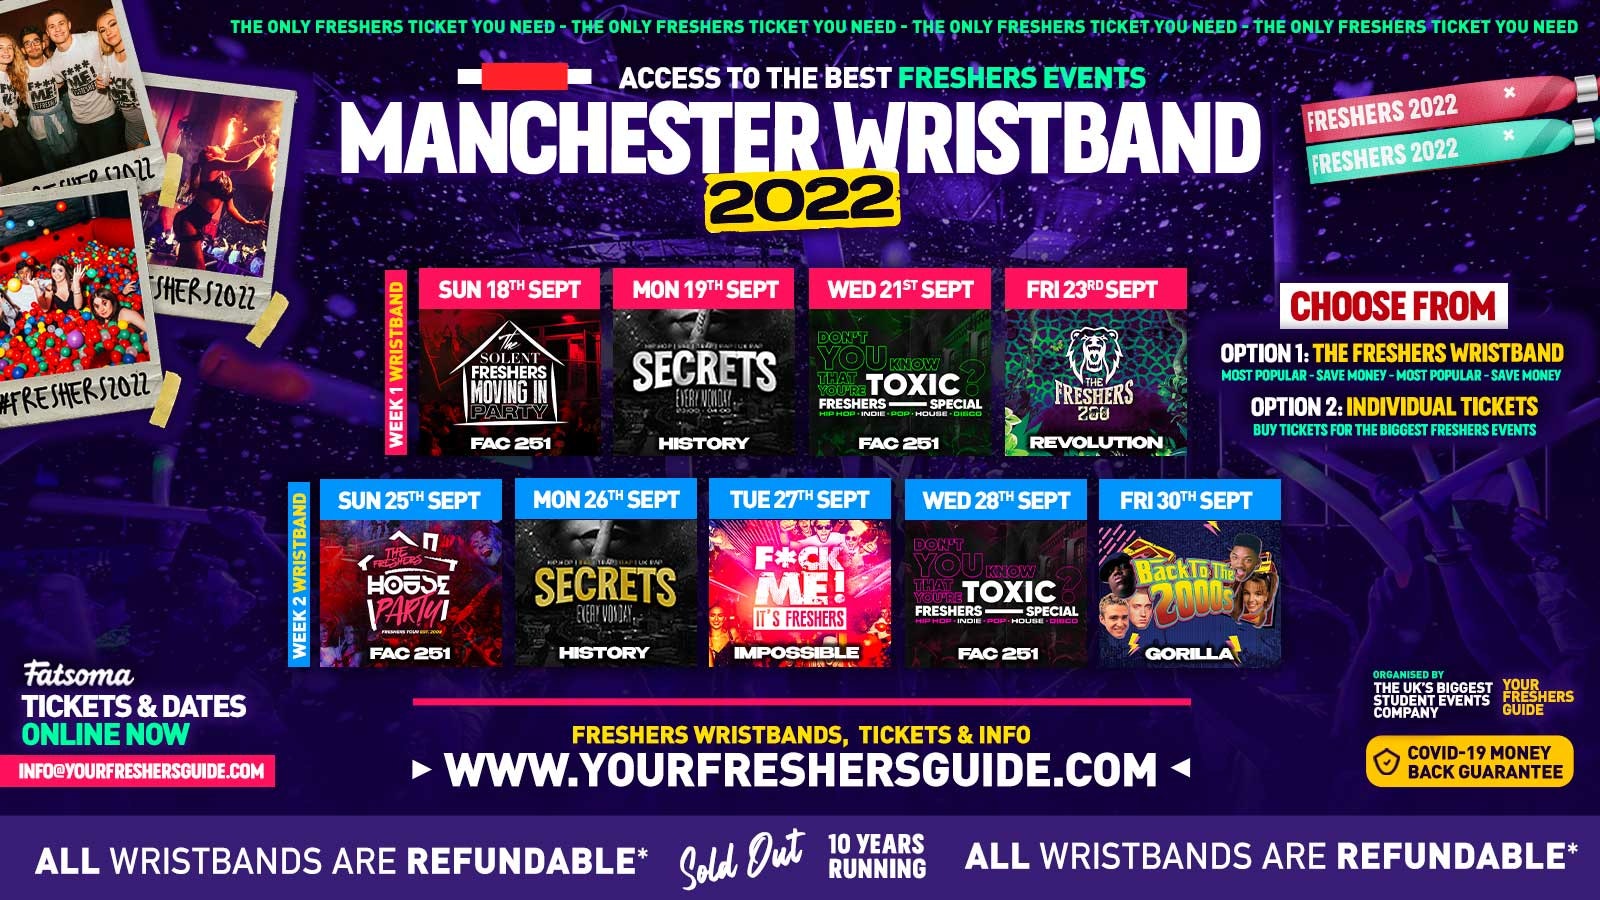 THE OFFICIAL MANCHESTER FRESHERS WRISTBAND! – 85% SOLD OUT ⚠️